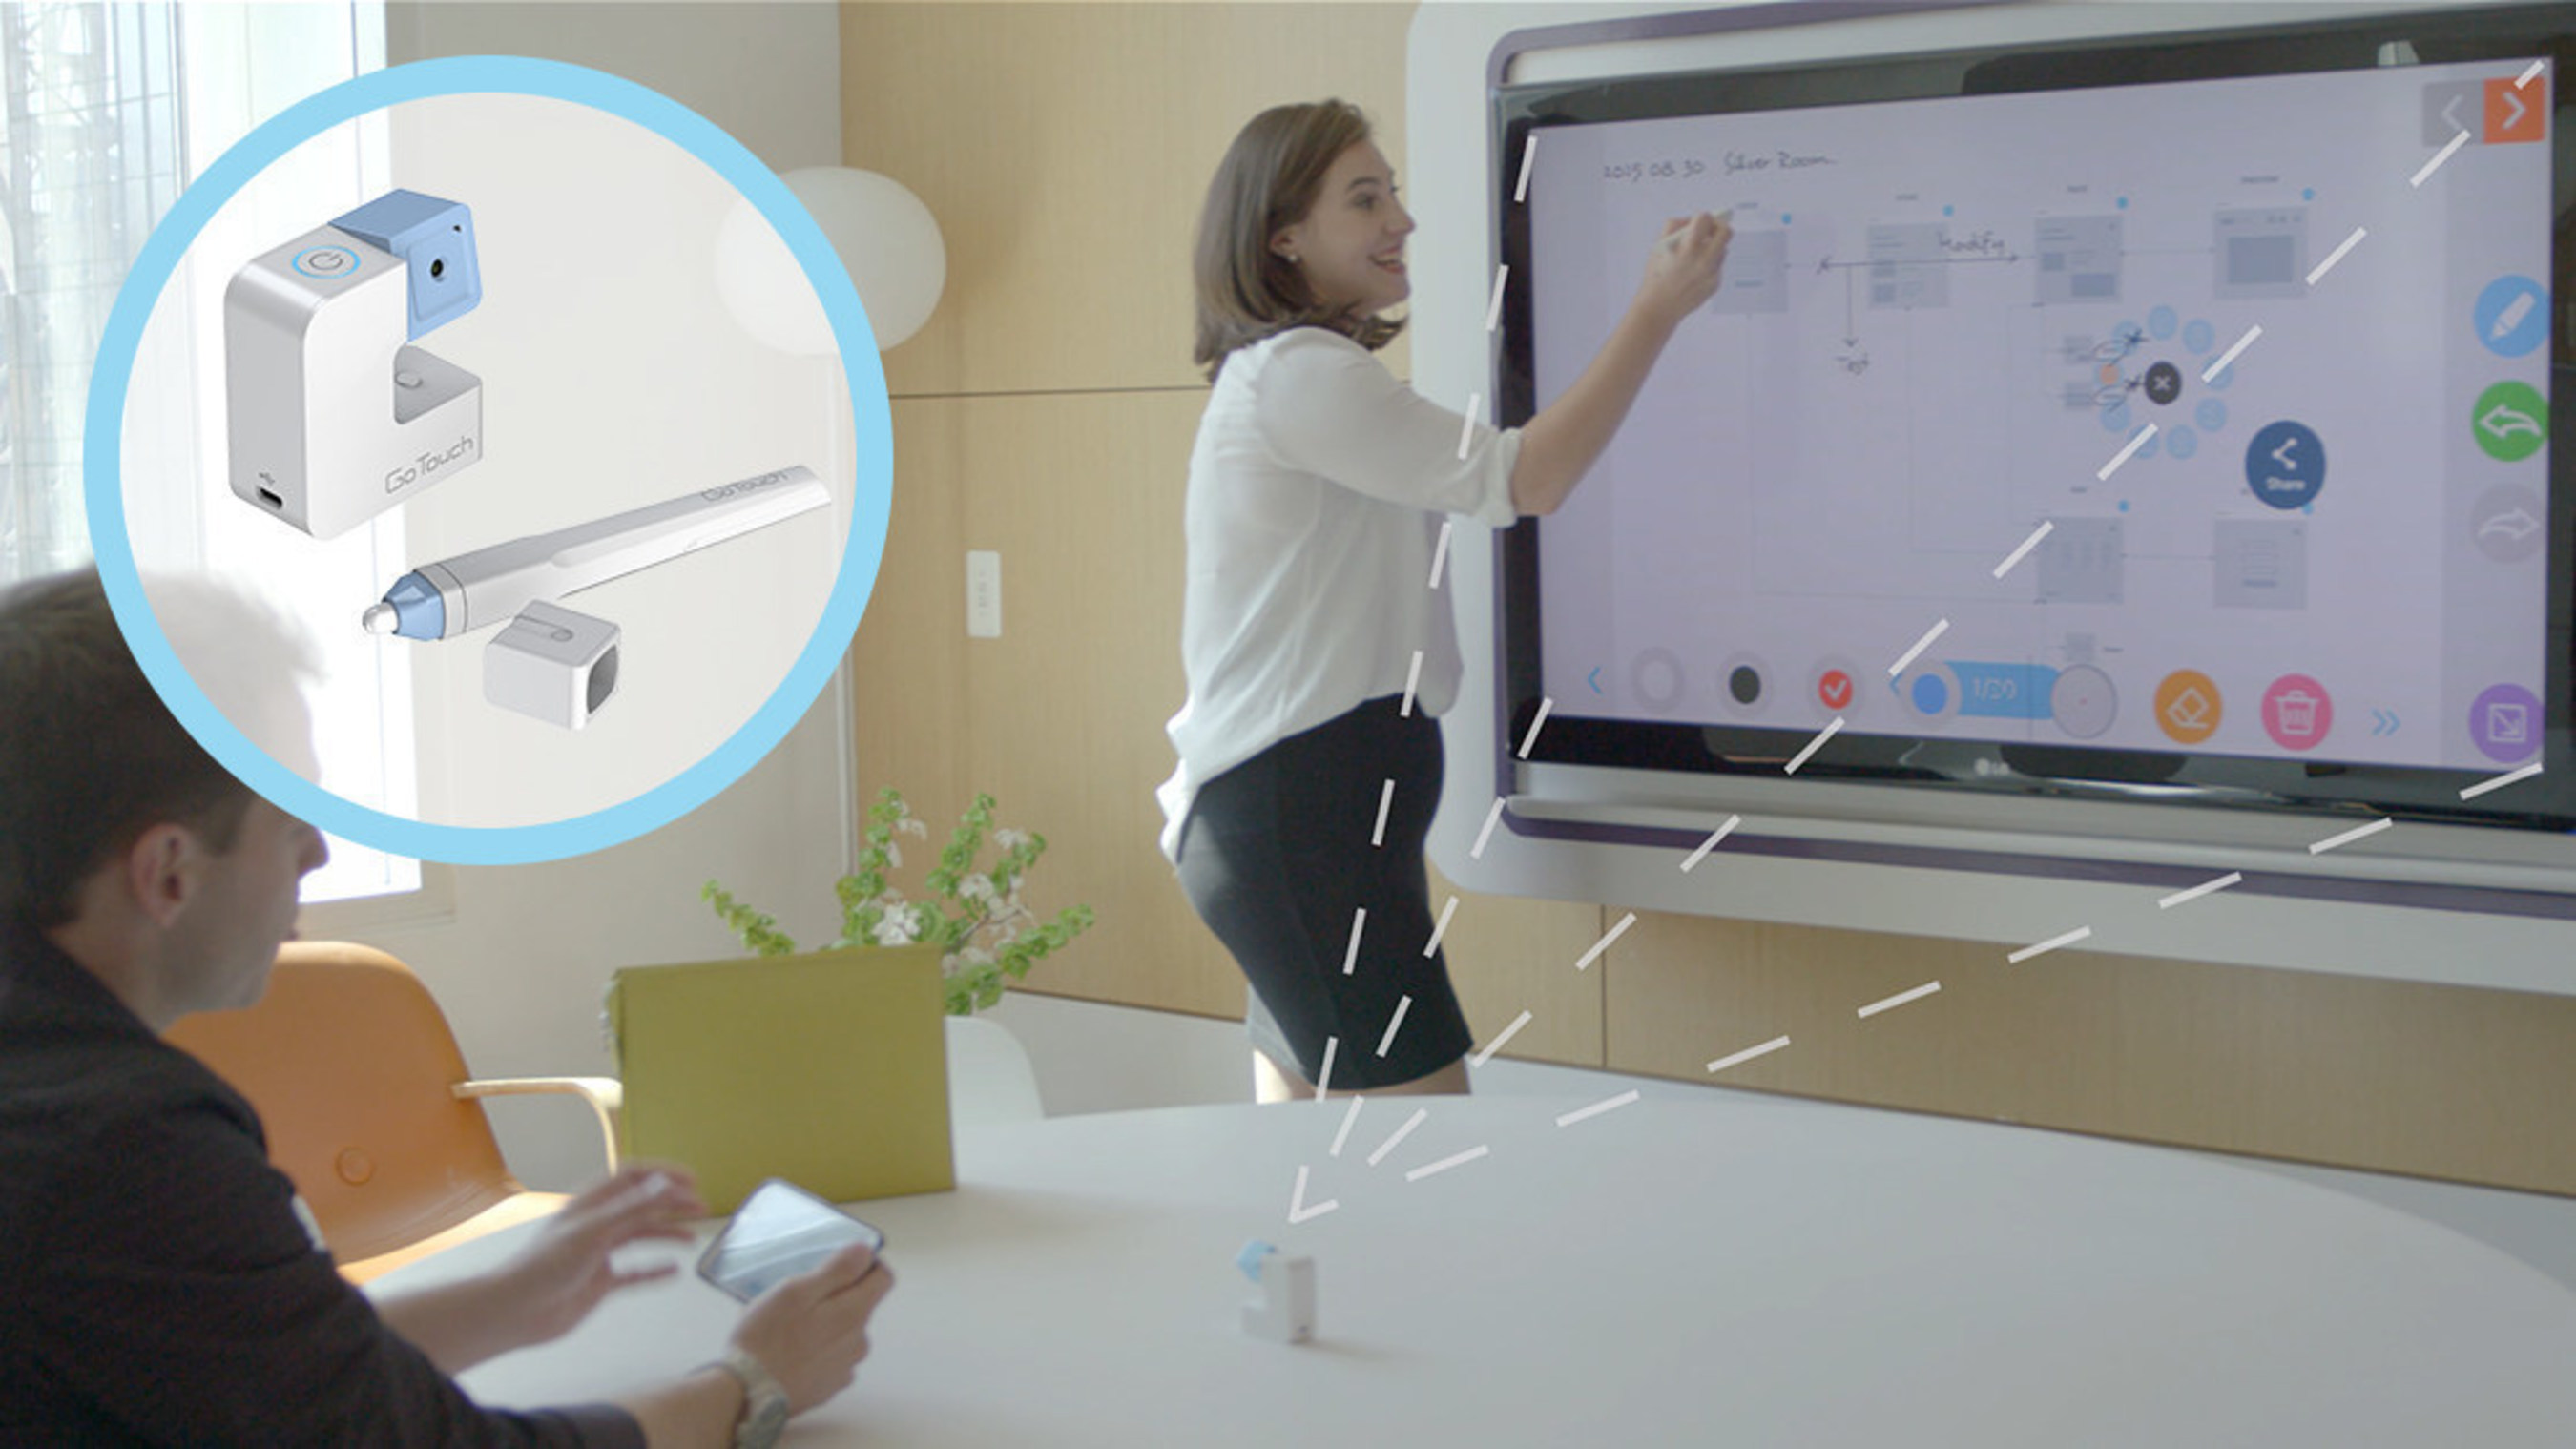 GoTouch Launches on Kickstarter, Turns Any TV Into an Interactive Whiteboard in 50 Seconds